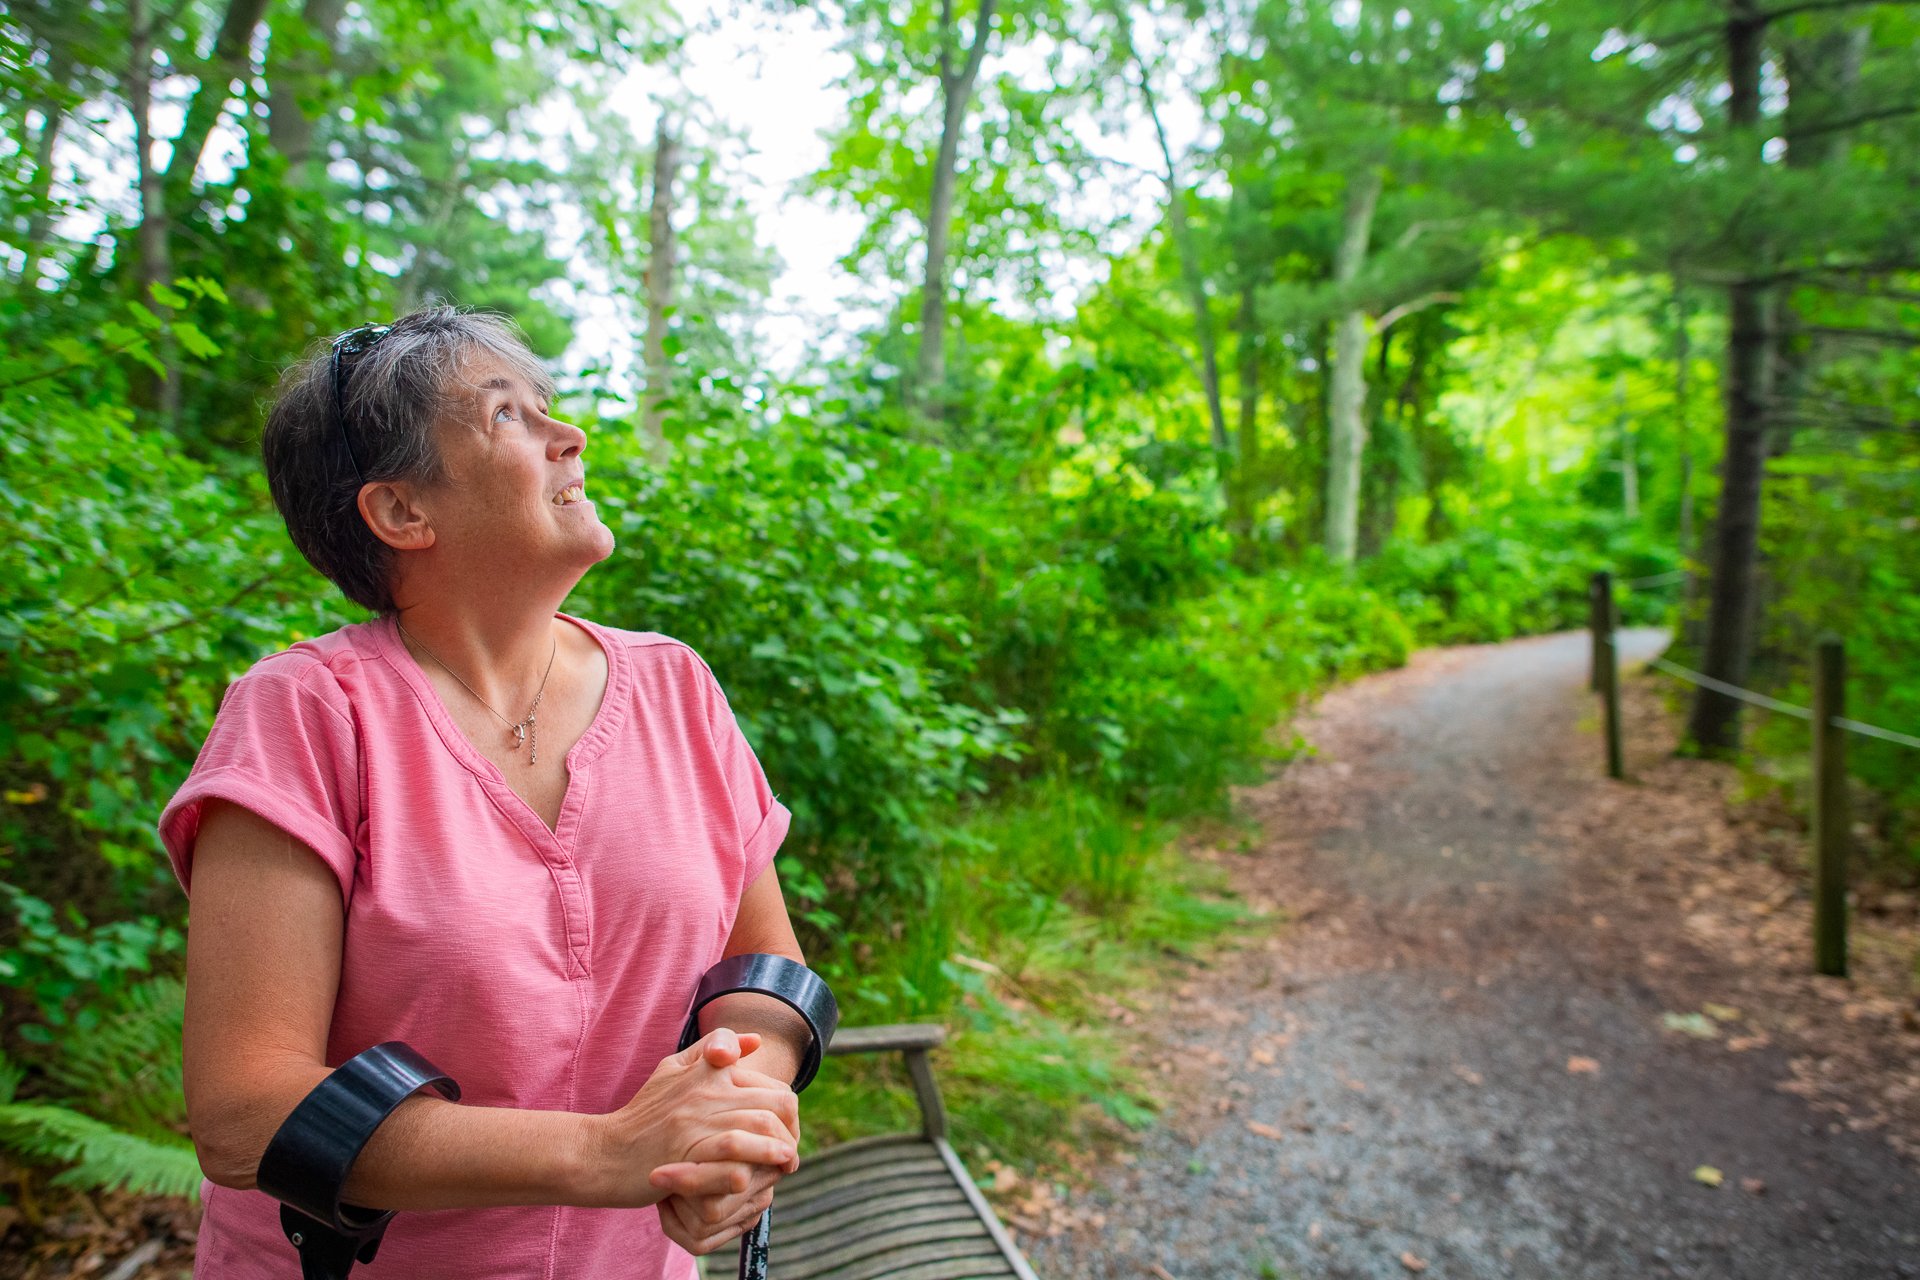 A woman in a pink shirt using forearm crutches looks up into the lush green canopy, pausing to rest at a bench along Stony Brook's wheelchair-accessible All Persons Trail